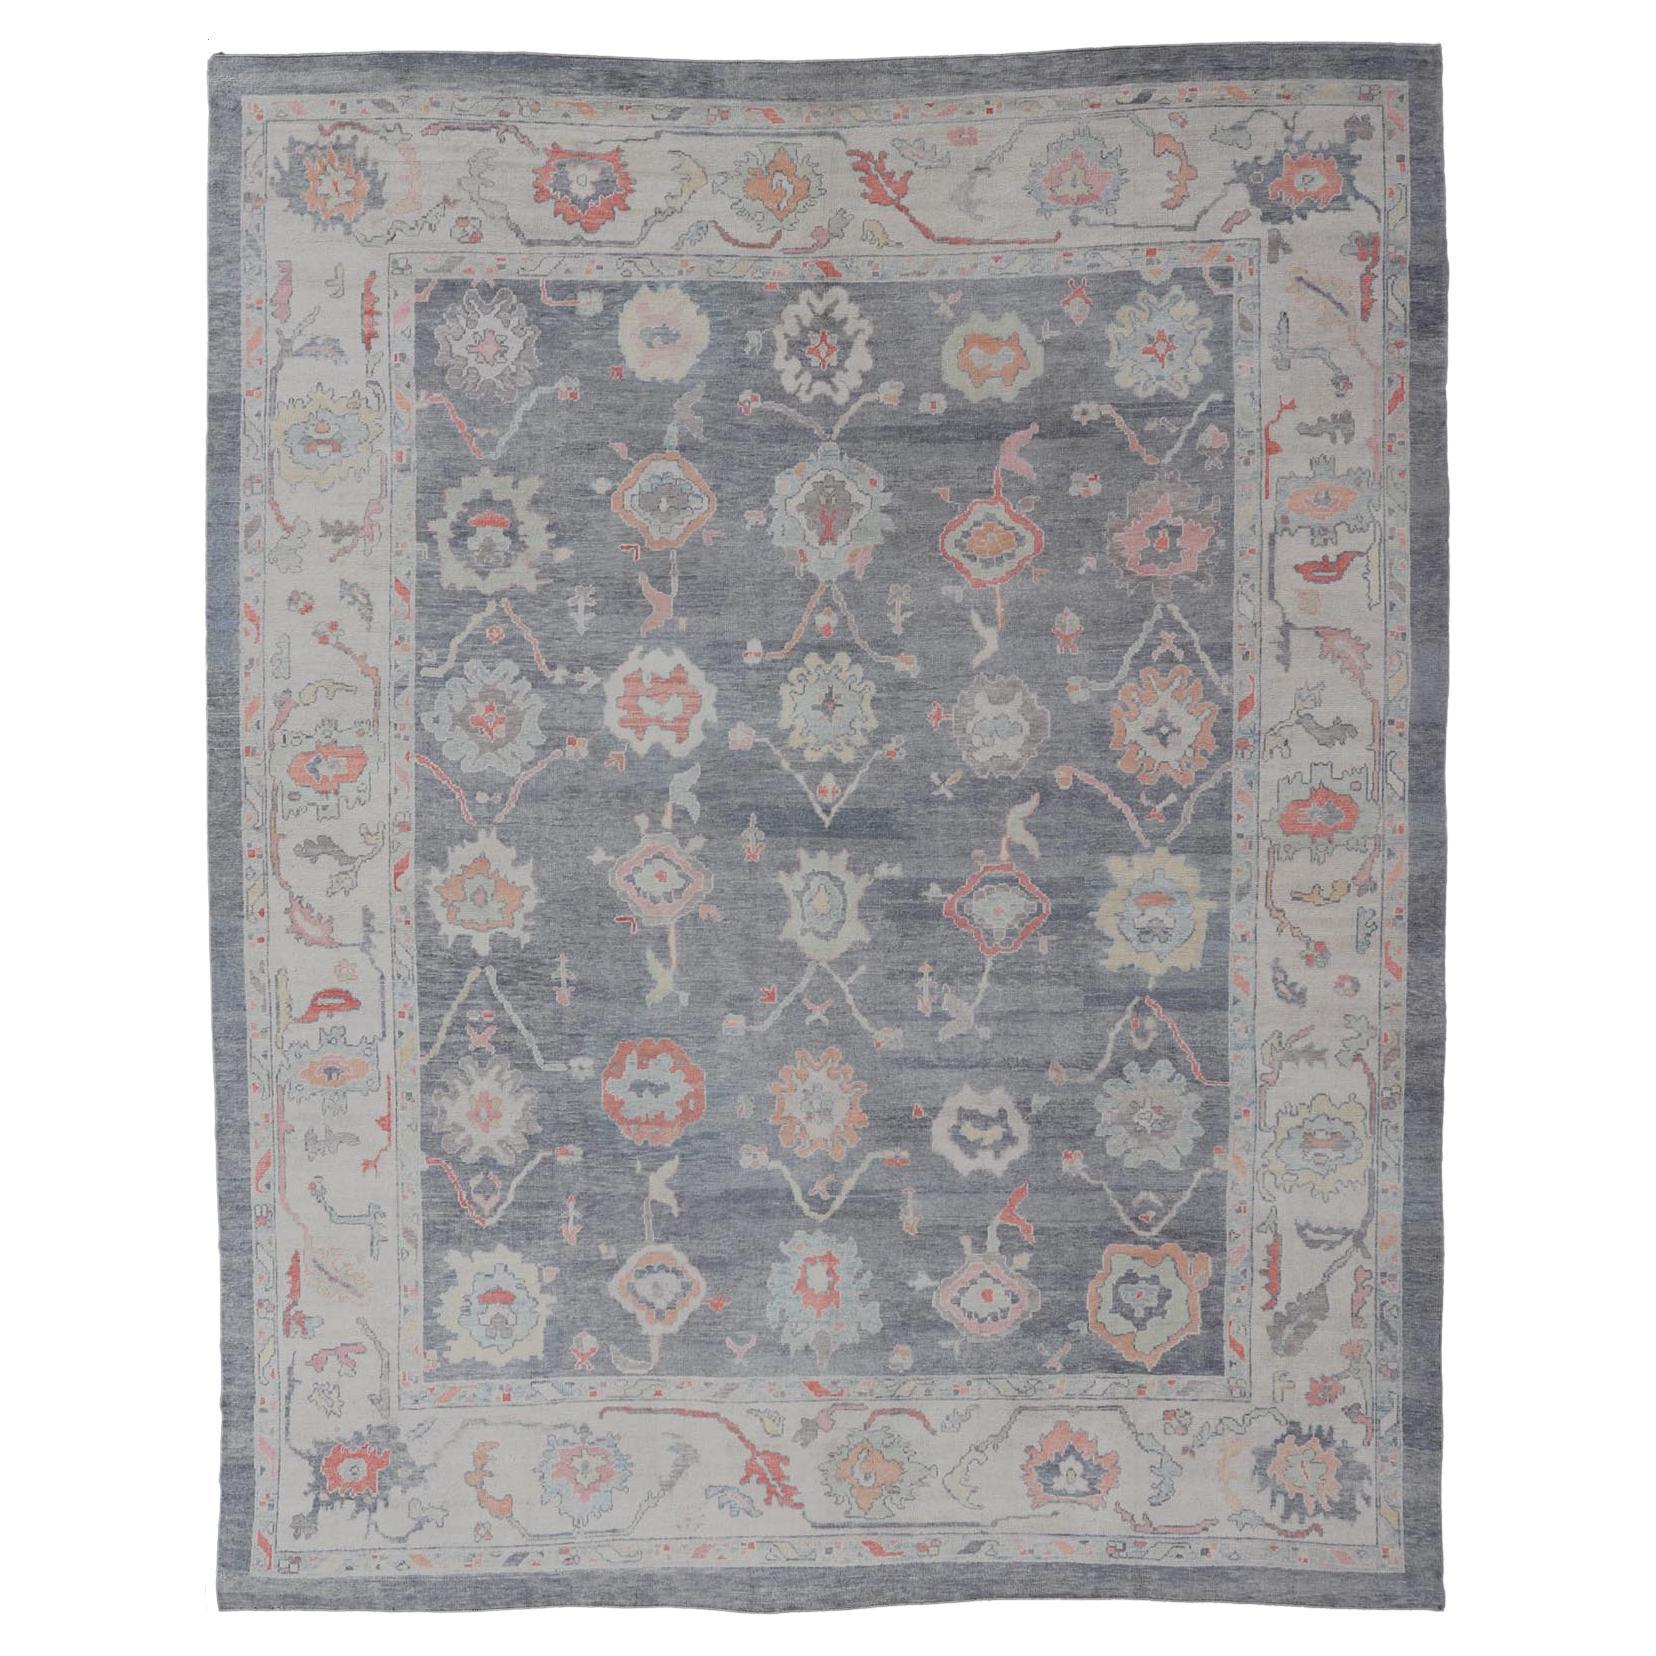 Large Turkish Modern Oushak Rug in Gray and Neutrals and All-Over Design